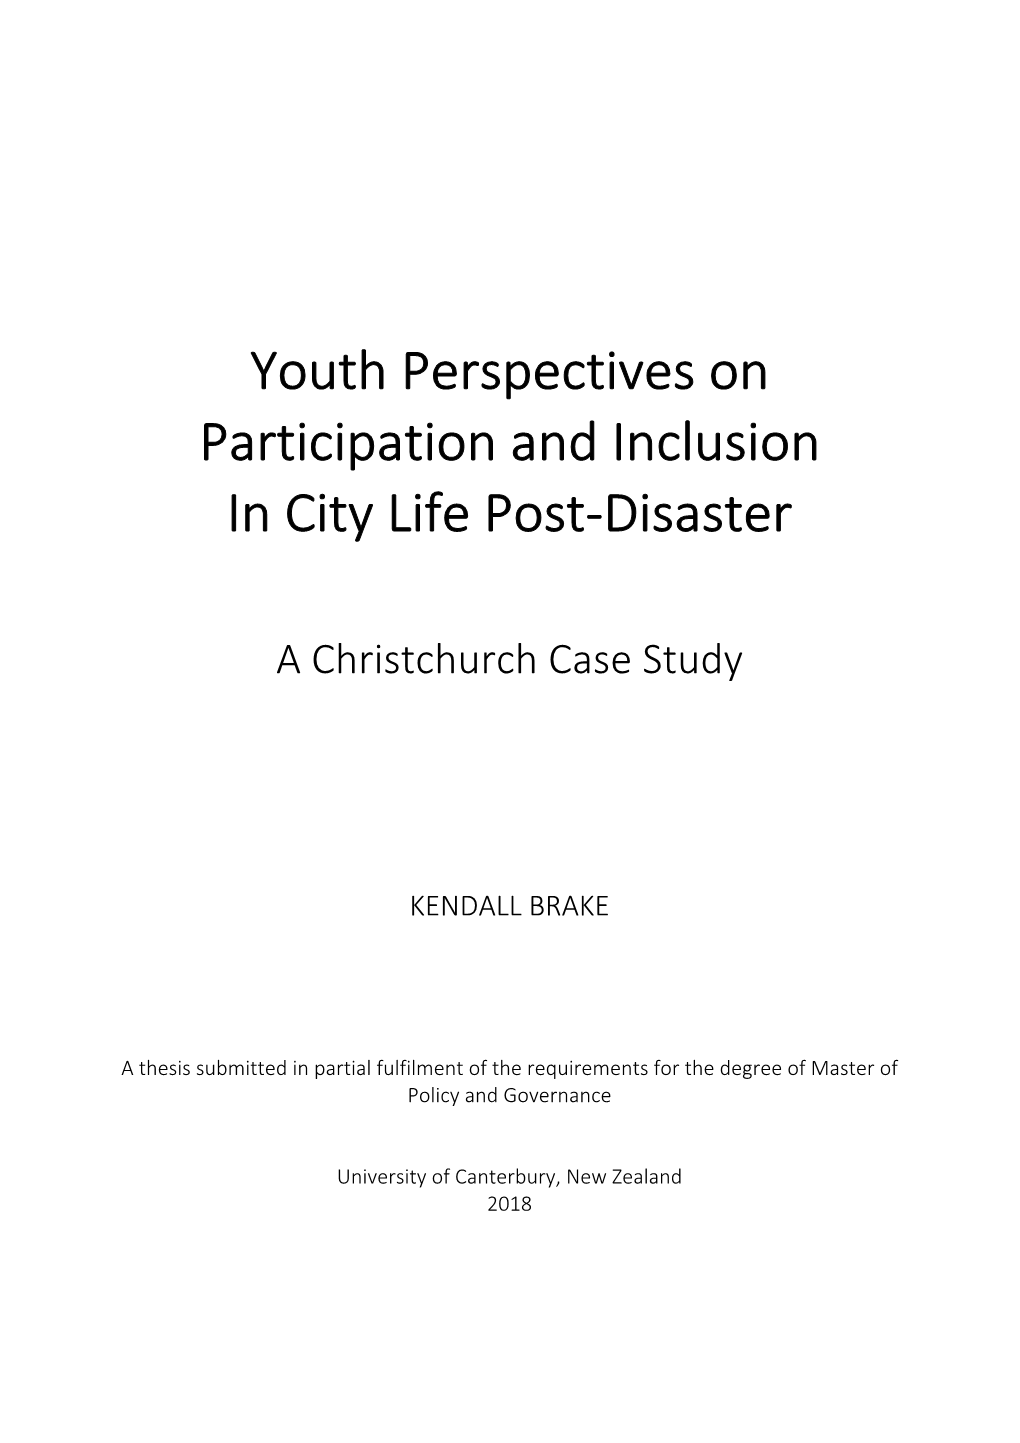 Youth Perspectives on Participation and Inclusion in City Life Post-Disaster